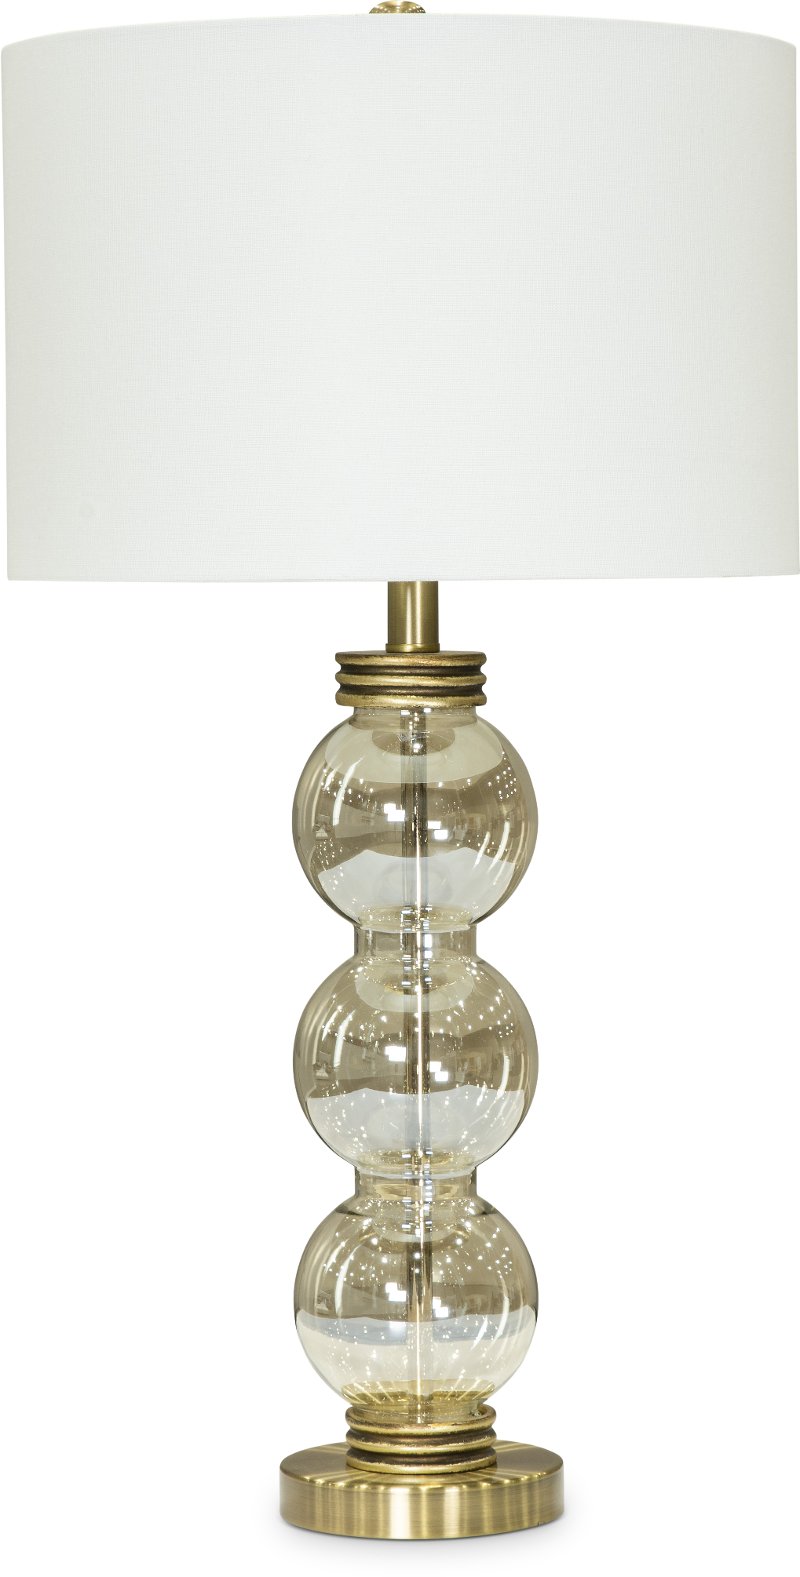 Tall Bubble Glass Table Lamp With White, Bubble Glass Table Lamp